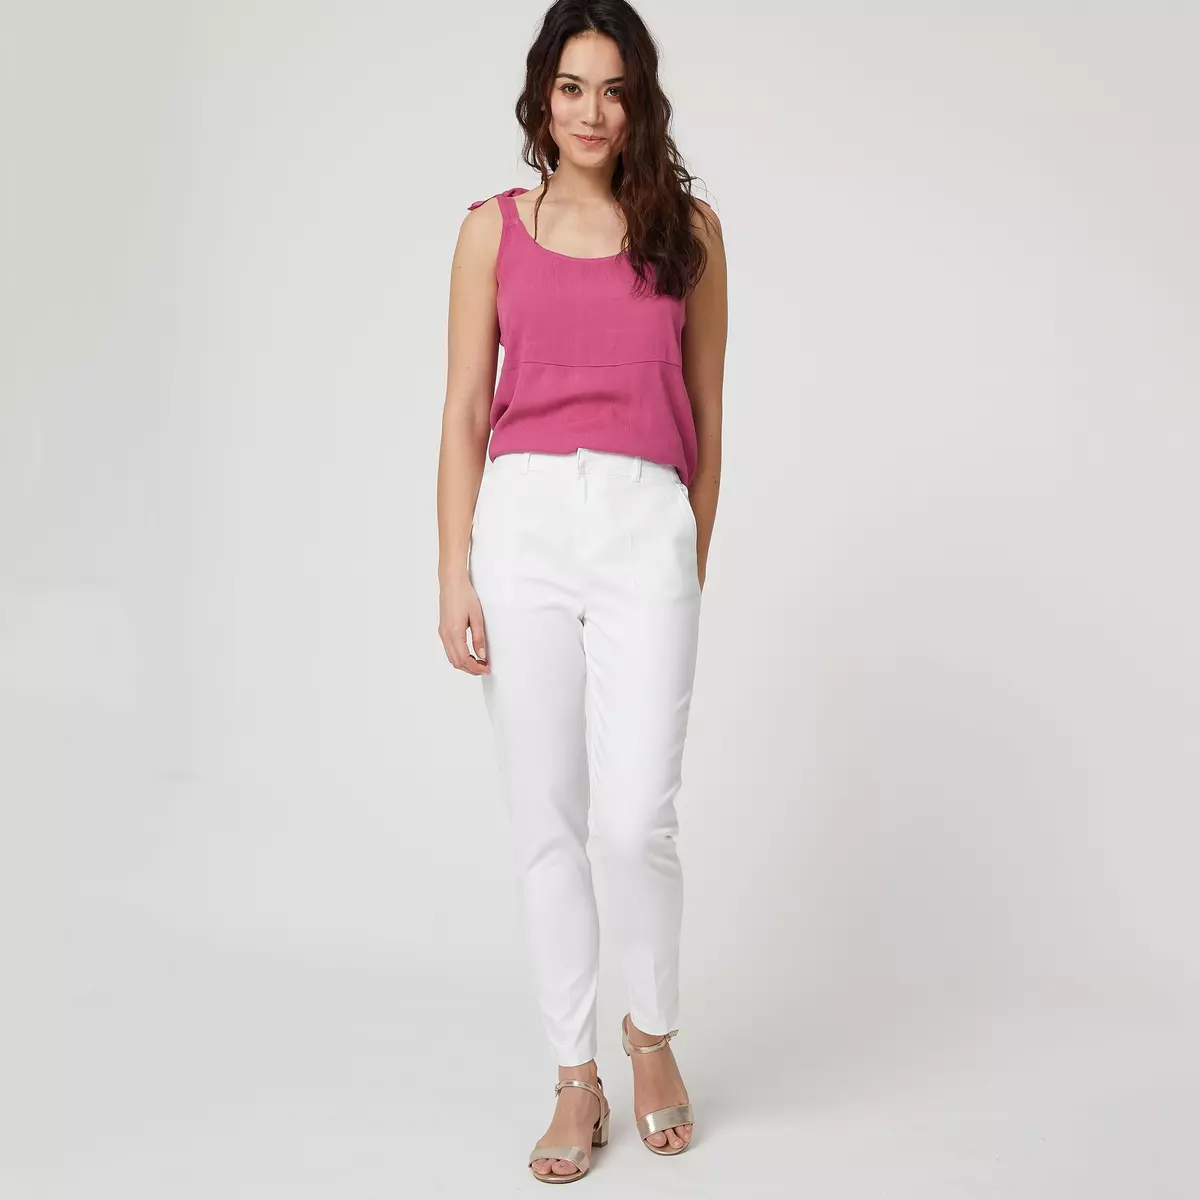 IN EXTENSO Pantalon femme Blanc taille 46